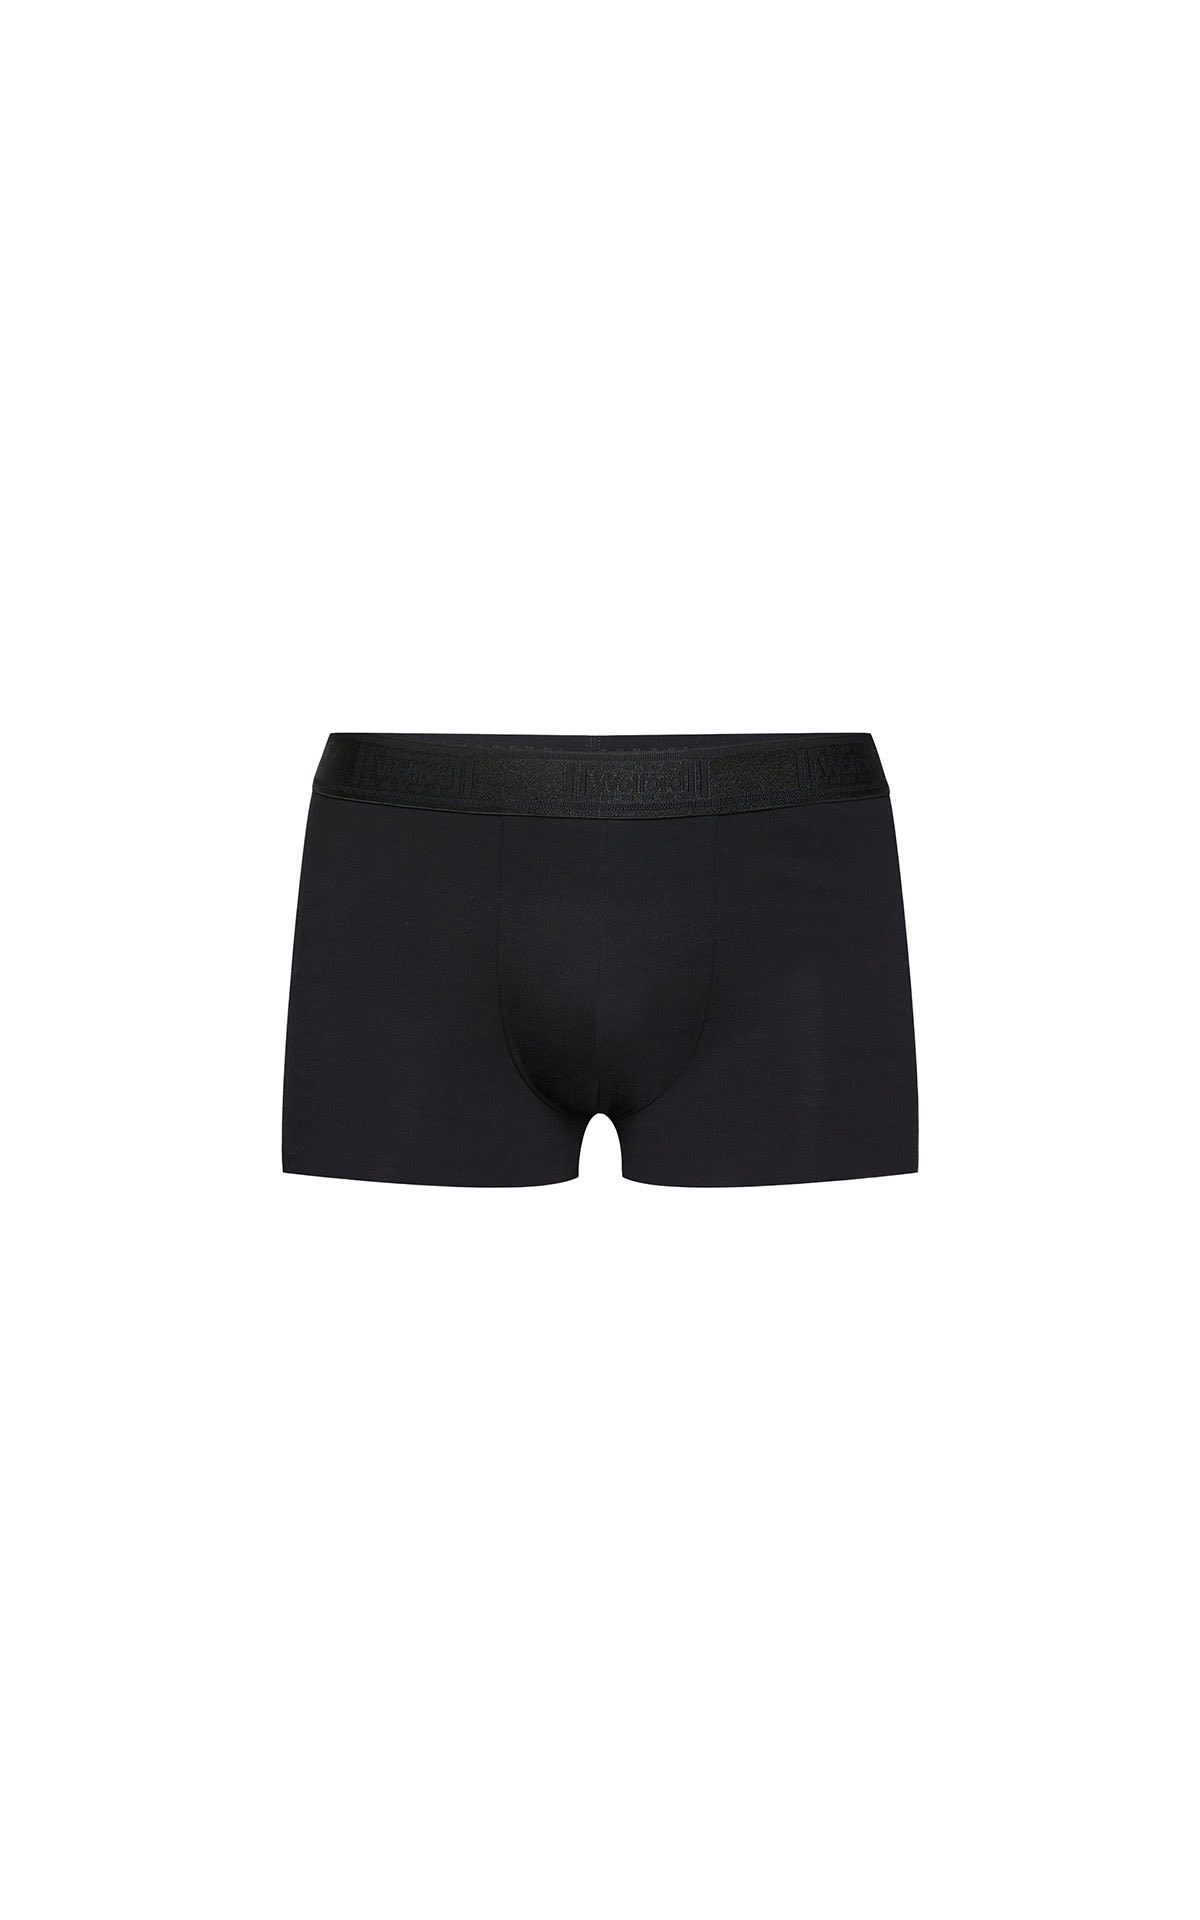 Wolford Men’s pure boxer brief from Bicester Village